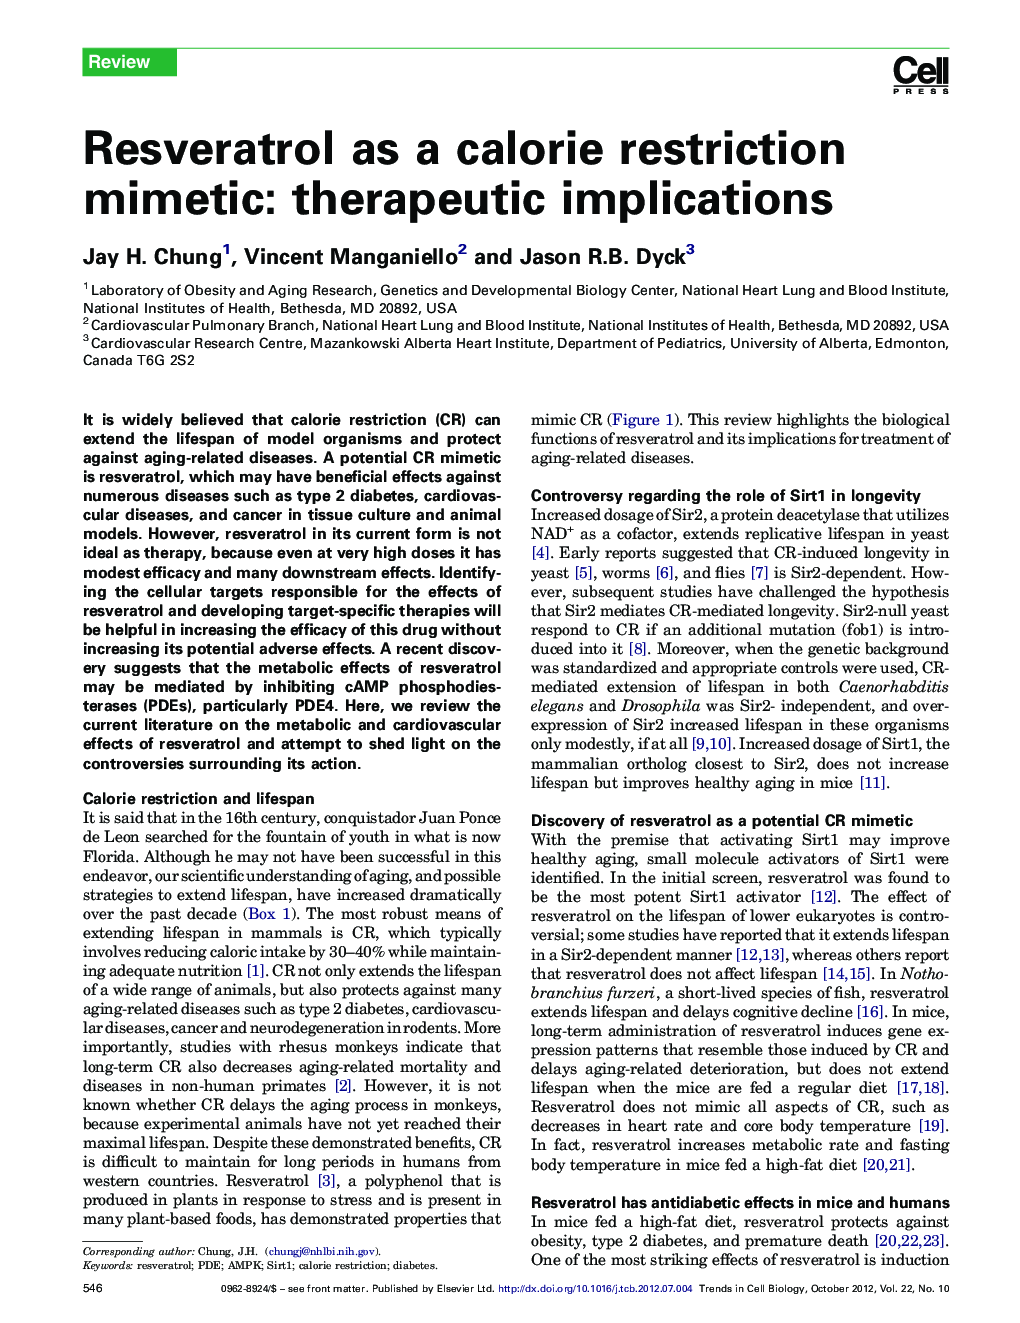 Resveratrol as a calorie restriction mimetic: therapeutic implications